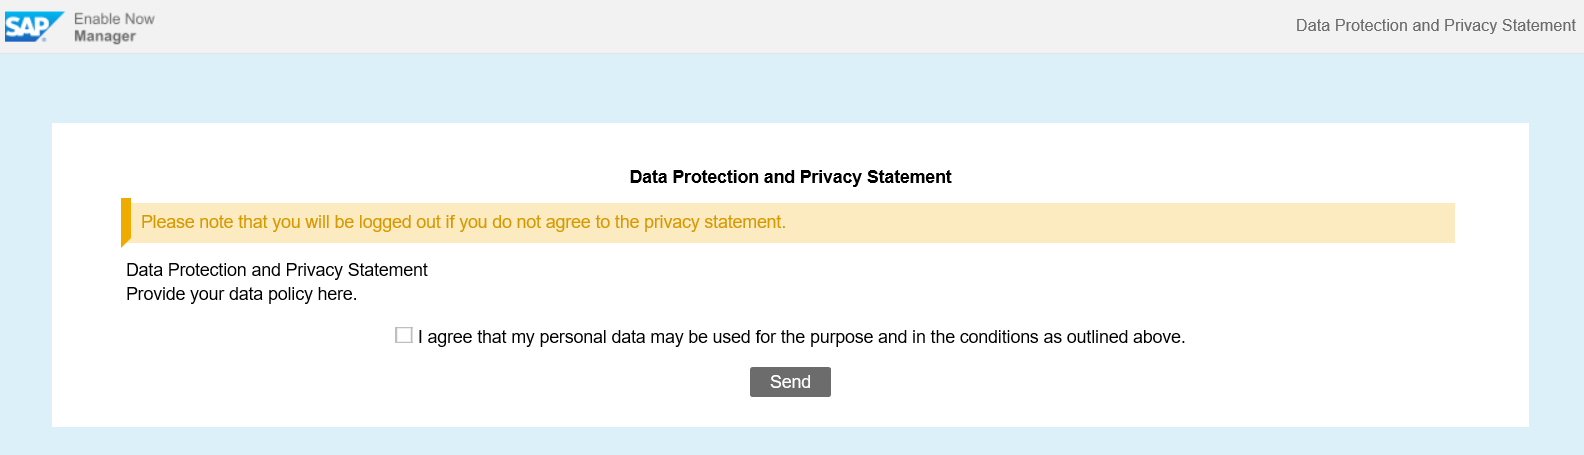 GDPR Privacy Statement.png